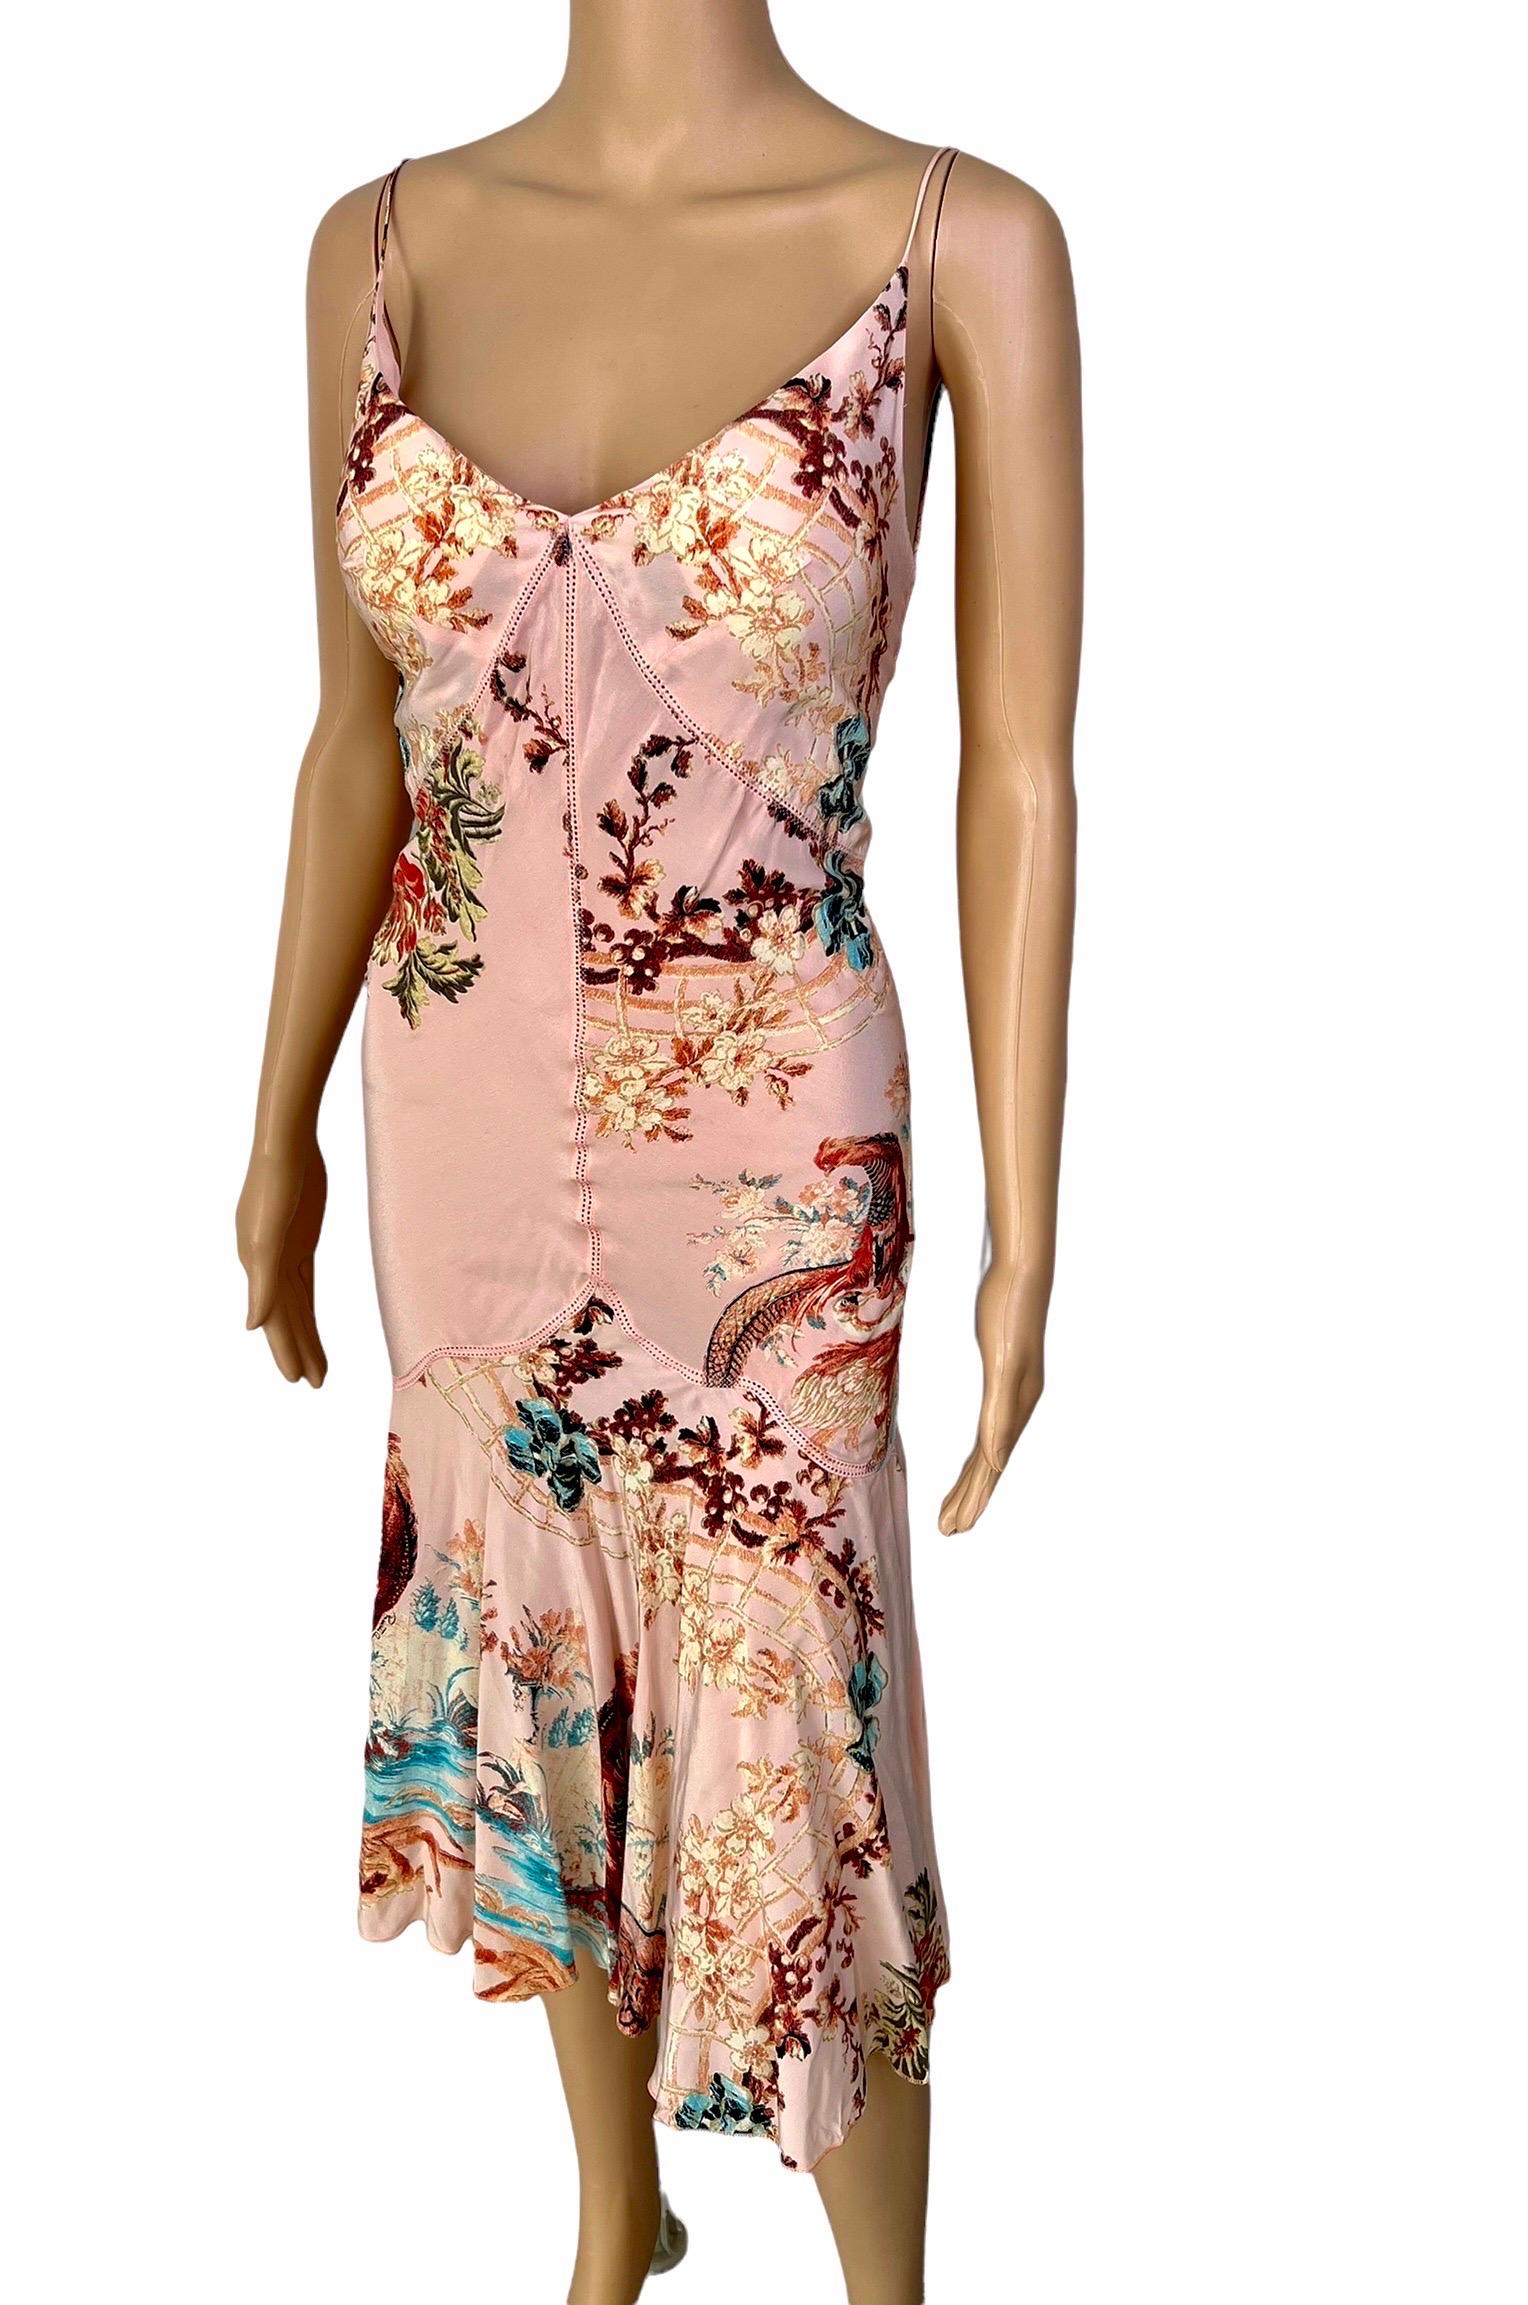 Roberto Cavalli S/S 2003 Plunging Neckline Backless Printed Silk Slip Midi Dress Size L

Please note the bust is padded.